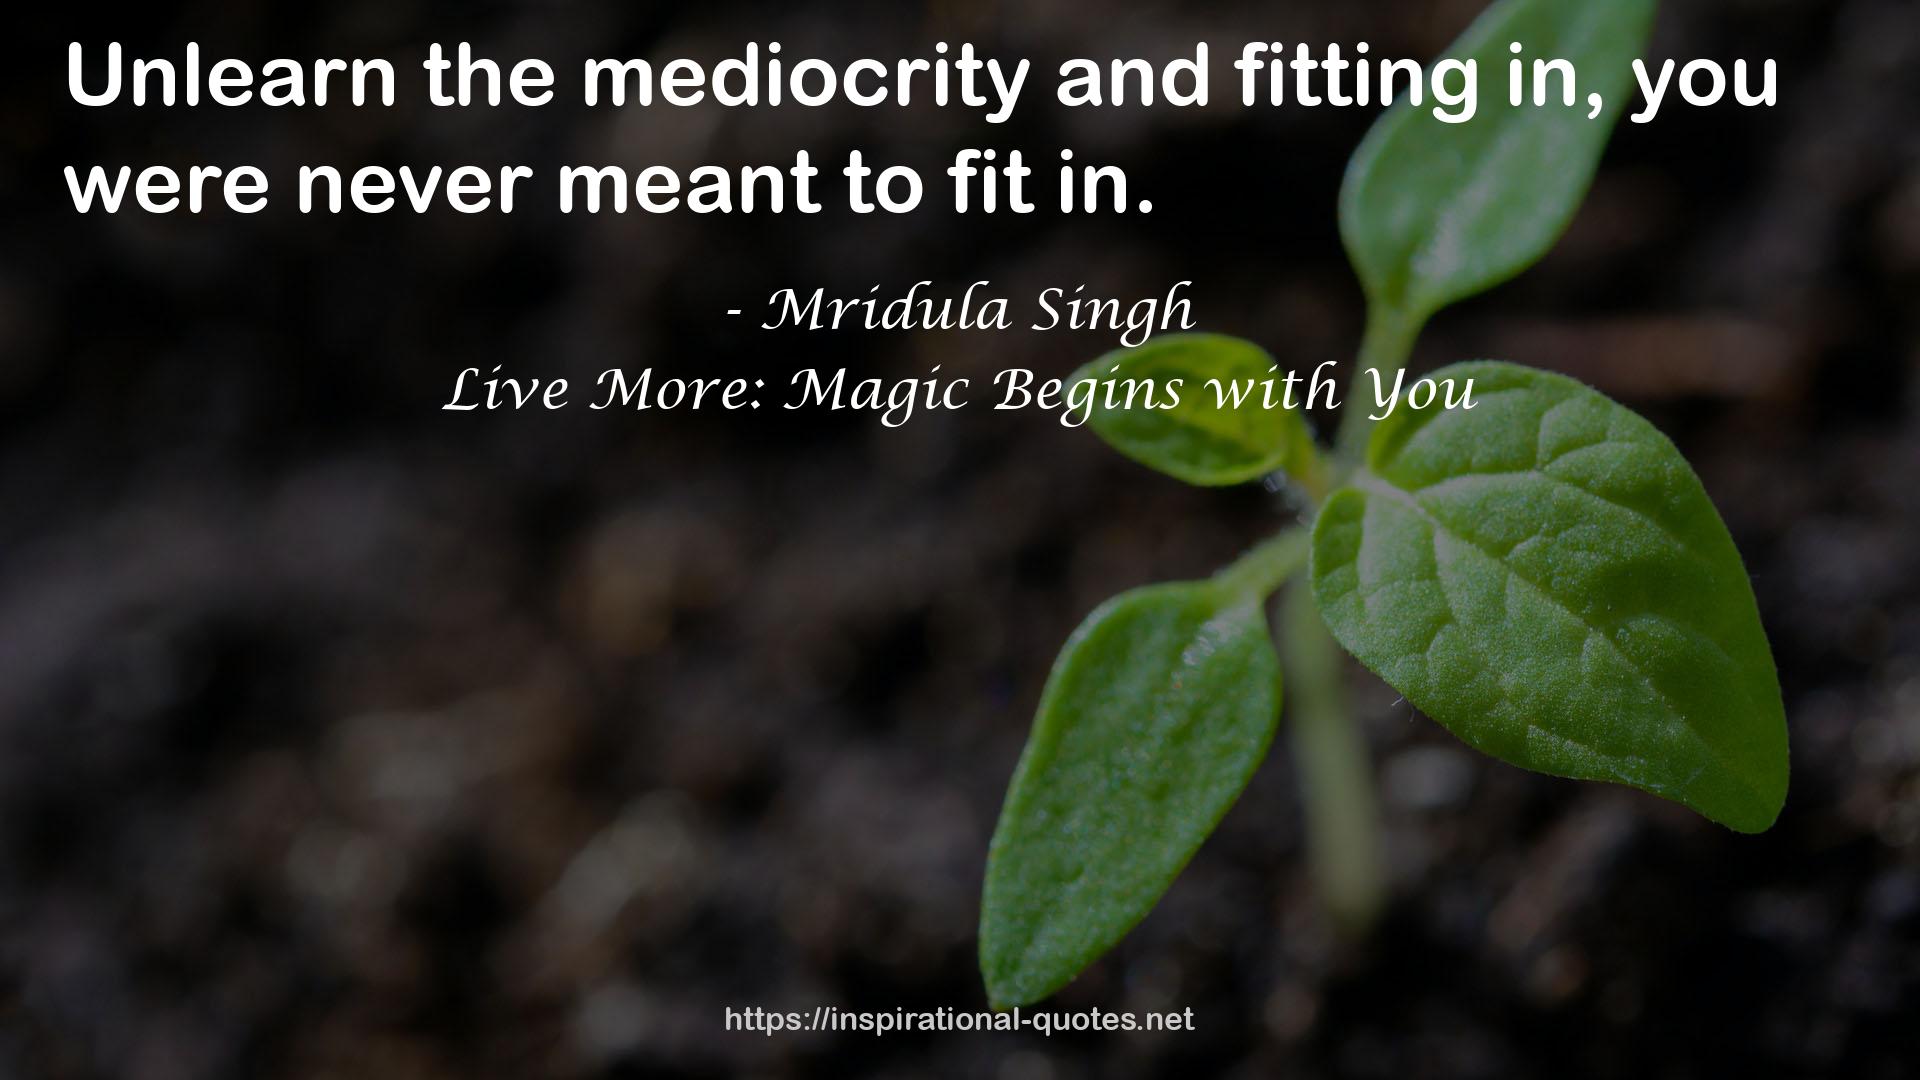 Live More: Magic Begins with You QUOTES